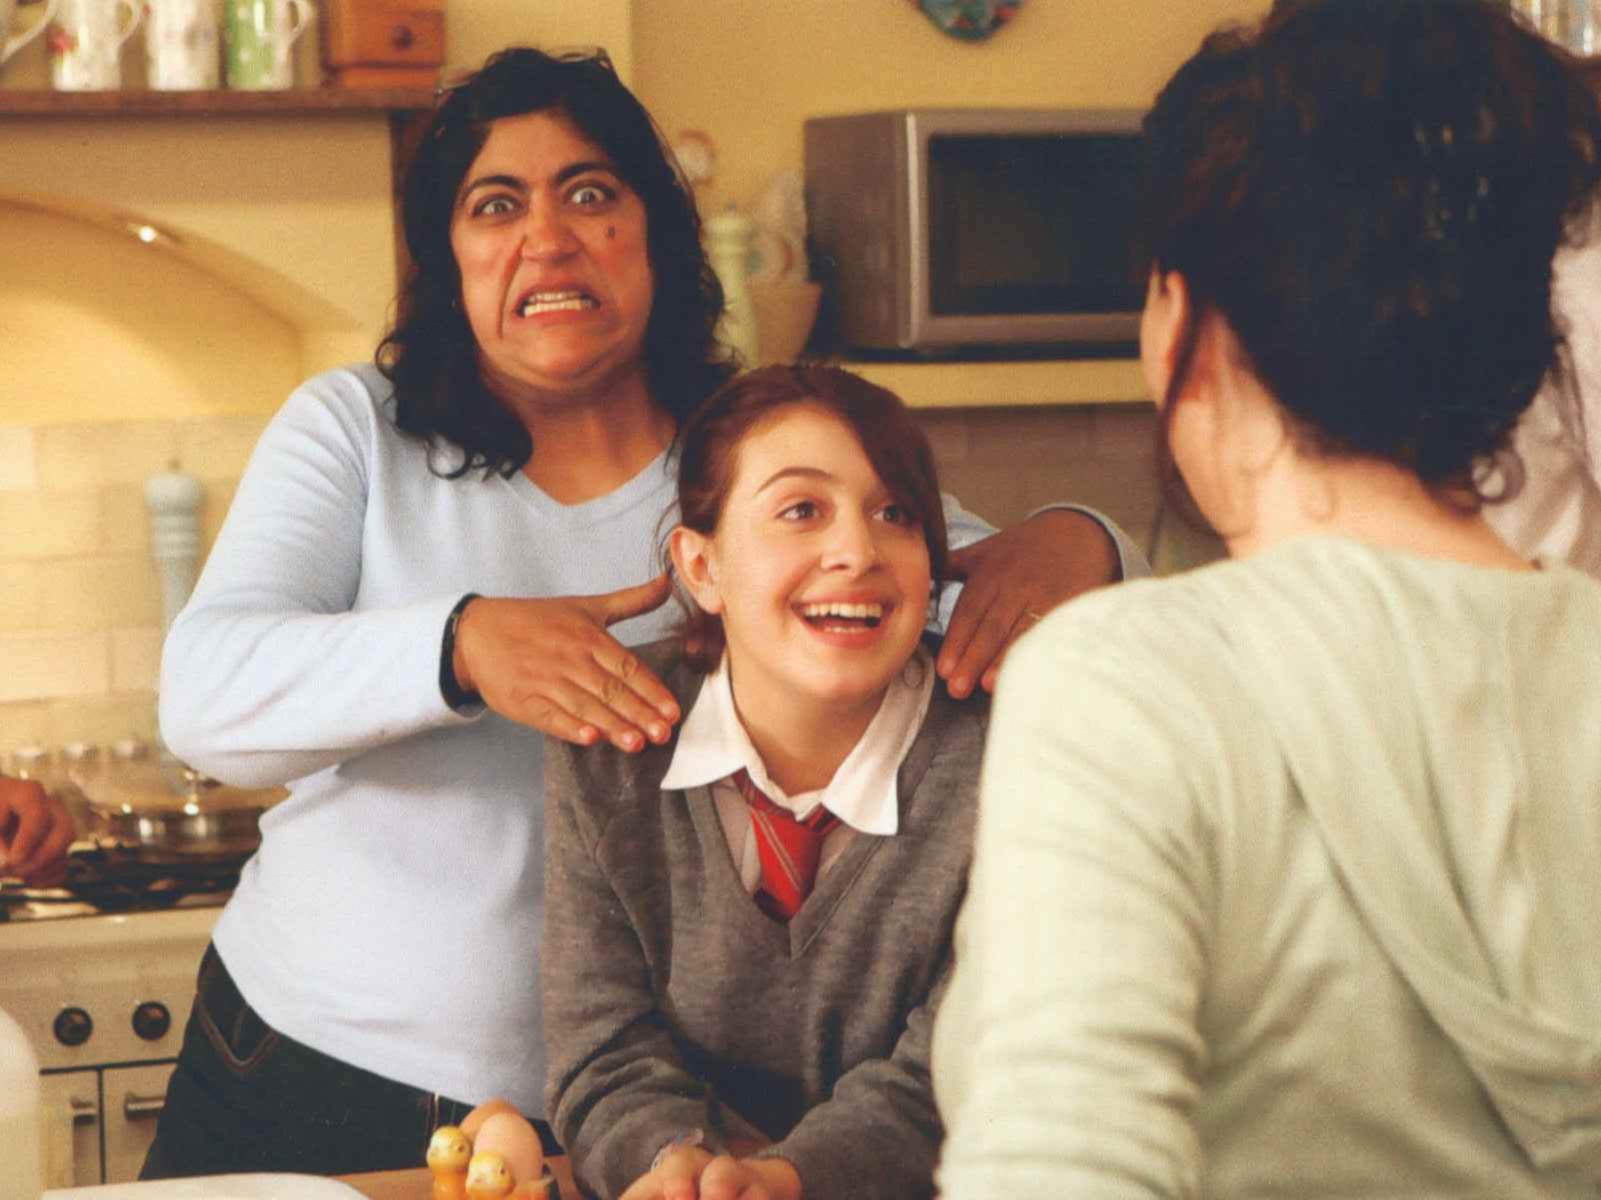 Gurinder Chadha (right) with Georgia Groome on the set of ‘Angus, Thongs and Perfect Snogging’